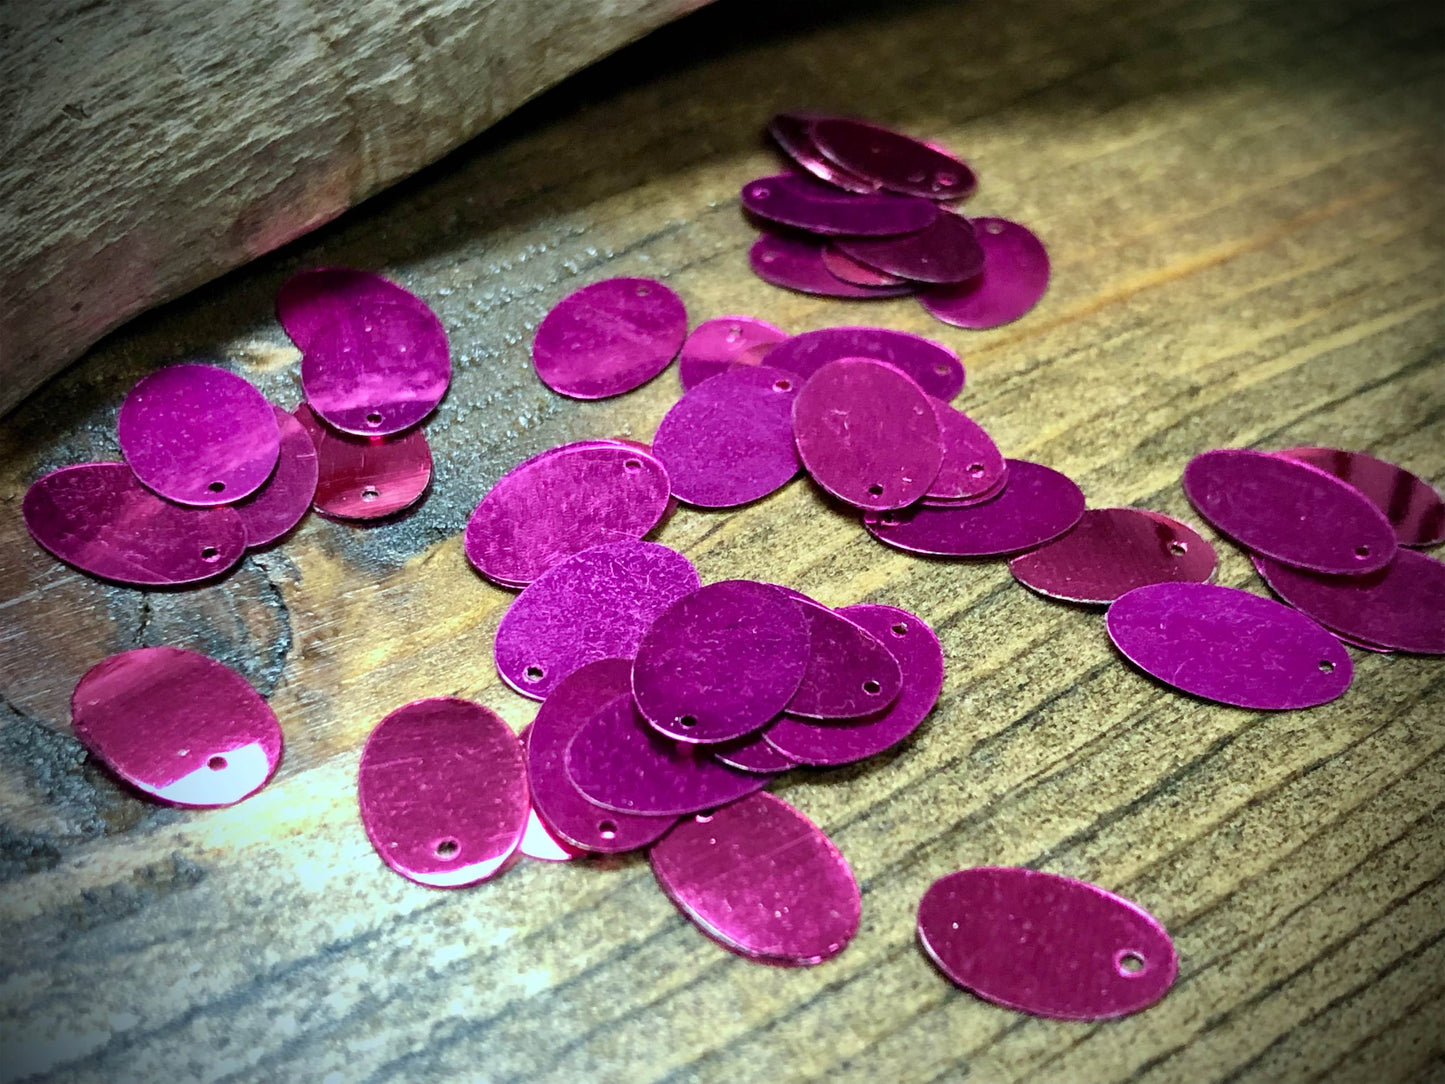 Vintage Sequins - 14mm x 9mm - Bag of Approx. 60 - Fuchsia - Oval